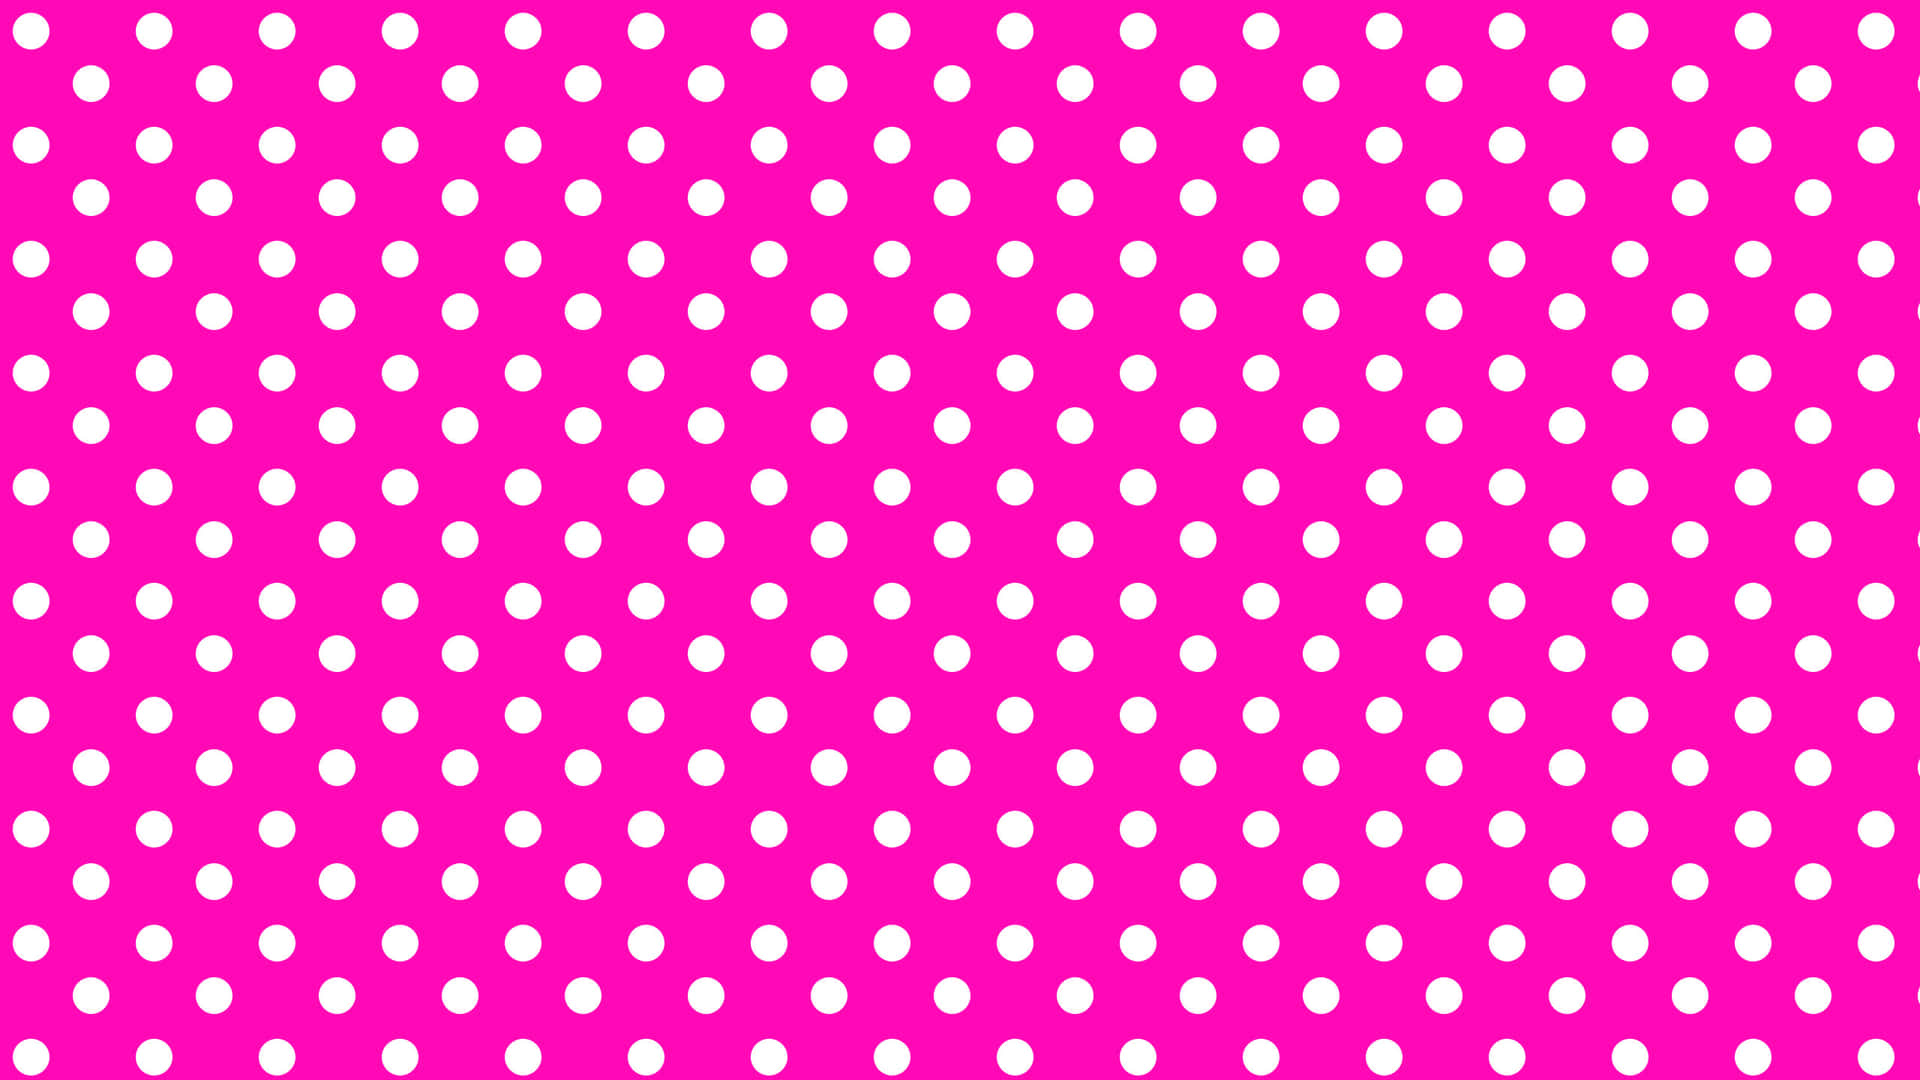 3. Baby Blue and Pink Polka Dot Design - wide 4